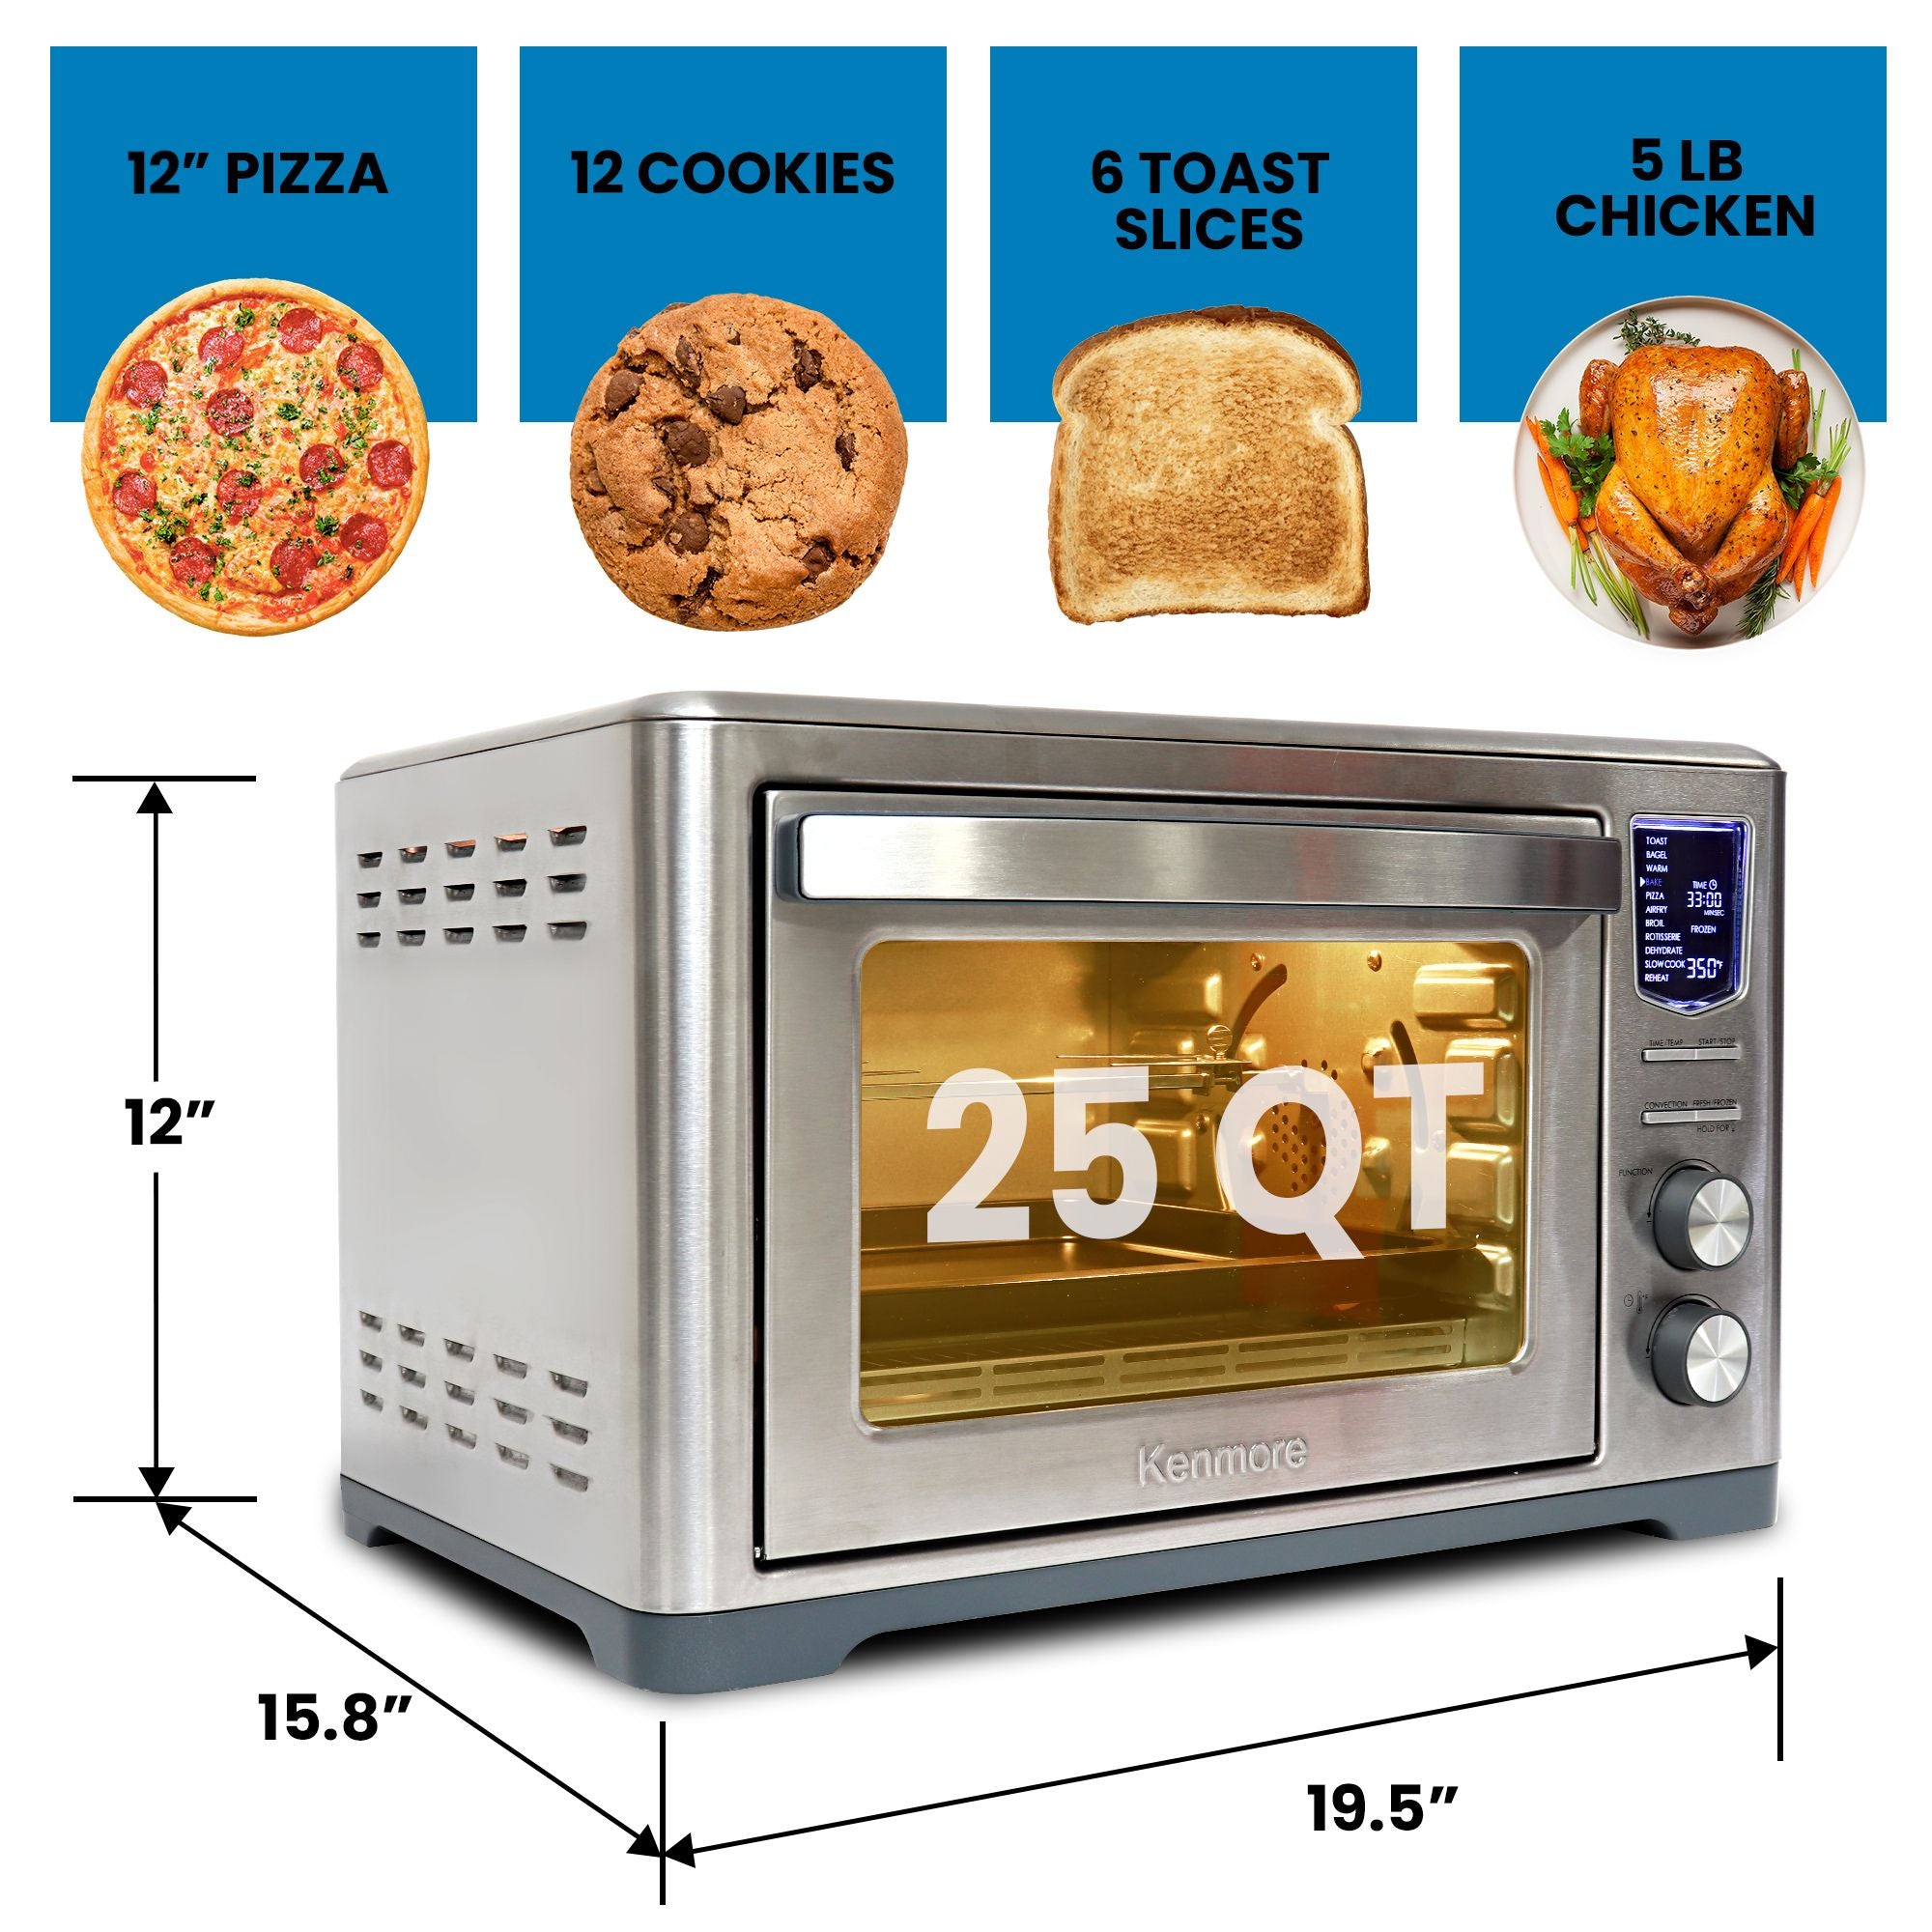 Kenmore 24L convection toaster oven on a white background with dimensions and capacity labeled and four inset pictures above showing what food fits inside: 12" pizza; 12 cookies; 6 toast slices; 5 lb chicken